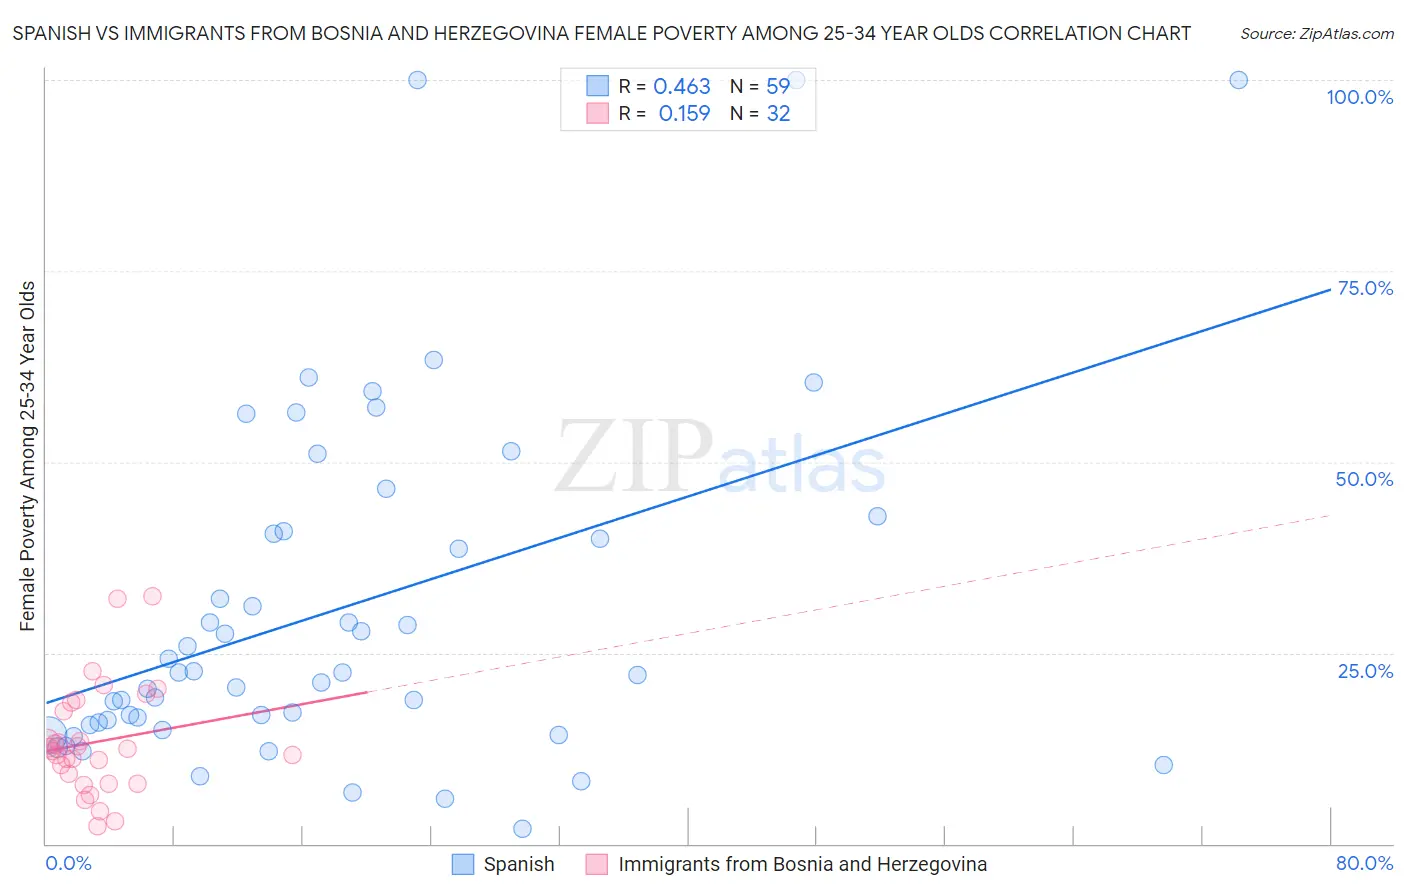 Spanish vs Immigrants from Bosnia and Herzegovina Female Poverty Among 25-34 Year Olds